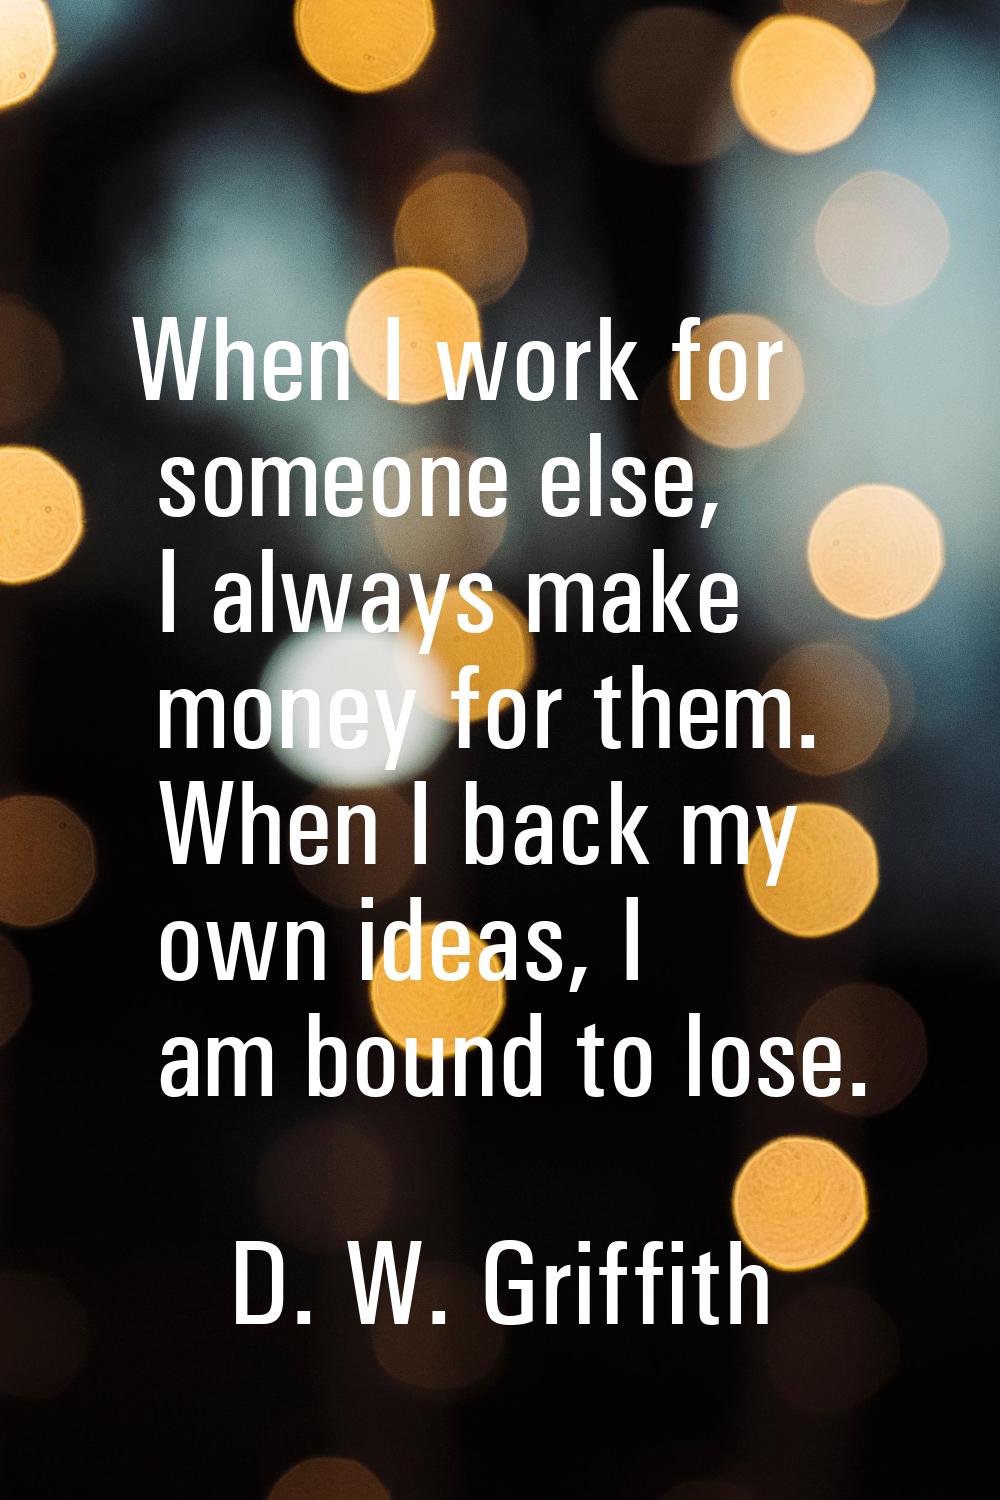 When I work for someone else, I always make money for them. When I back my own ideas, I am bound to